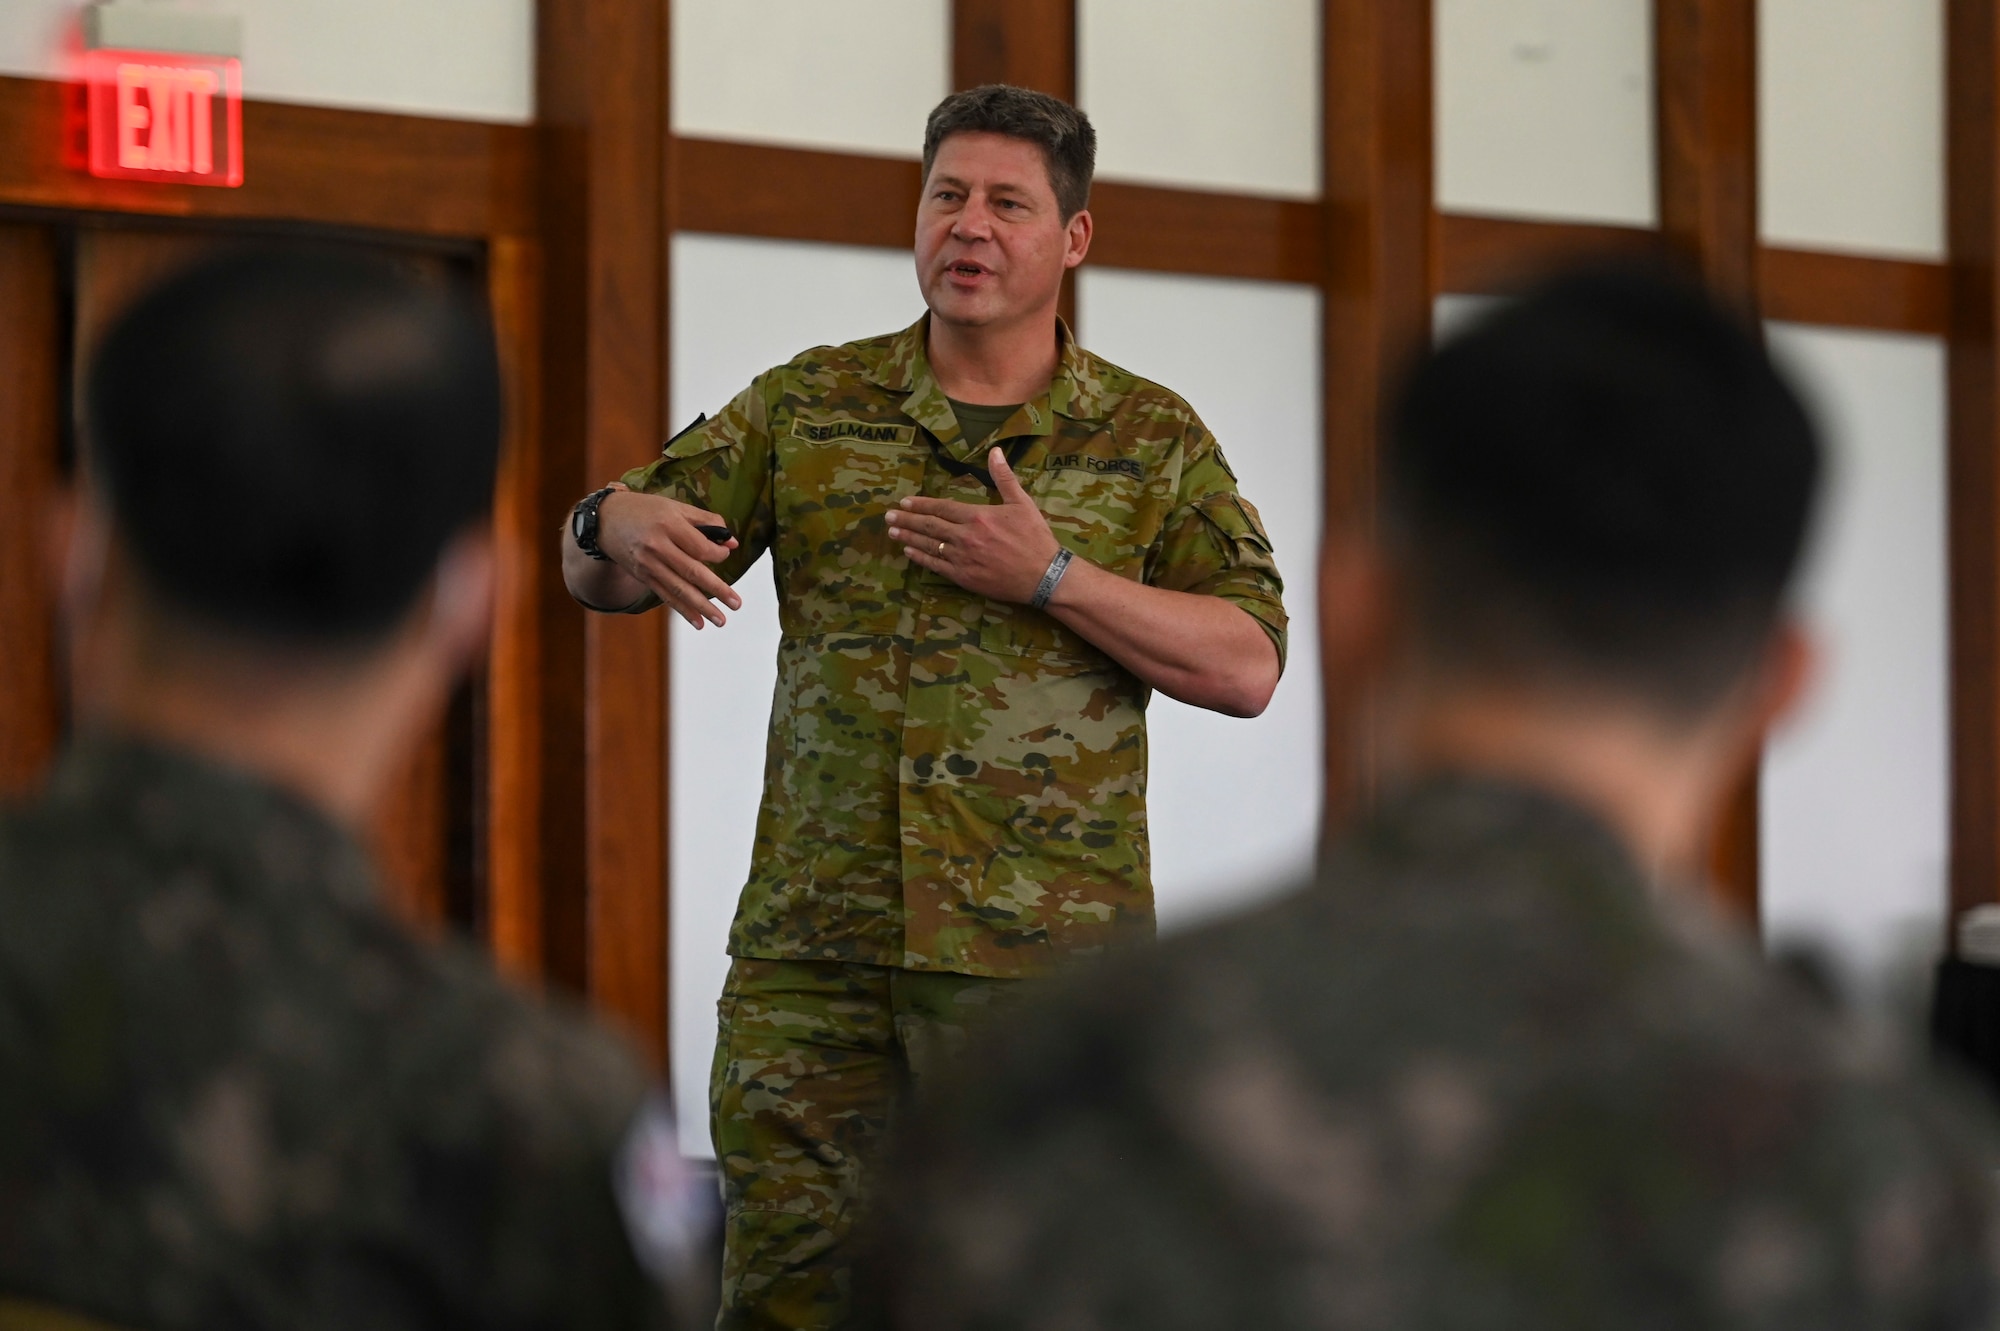 Wing Commander Michael Sellmann, a member of the Royal Australian Air Force, gives a briefing during the Pacific Unity Multi-Lateral Civil Engineer Key Leader Engagement, June 22, 2022 at Andersen Air Force Base, Guam. Senior military leaders from six Indo-Pacific nations gathered for the KLE to focus on multi-lateral efforts accelerating interoperability among their respective engineers. (U.S. Air Force Photo by Airman 1st Class Emily Saxton)